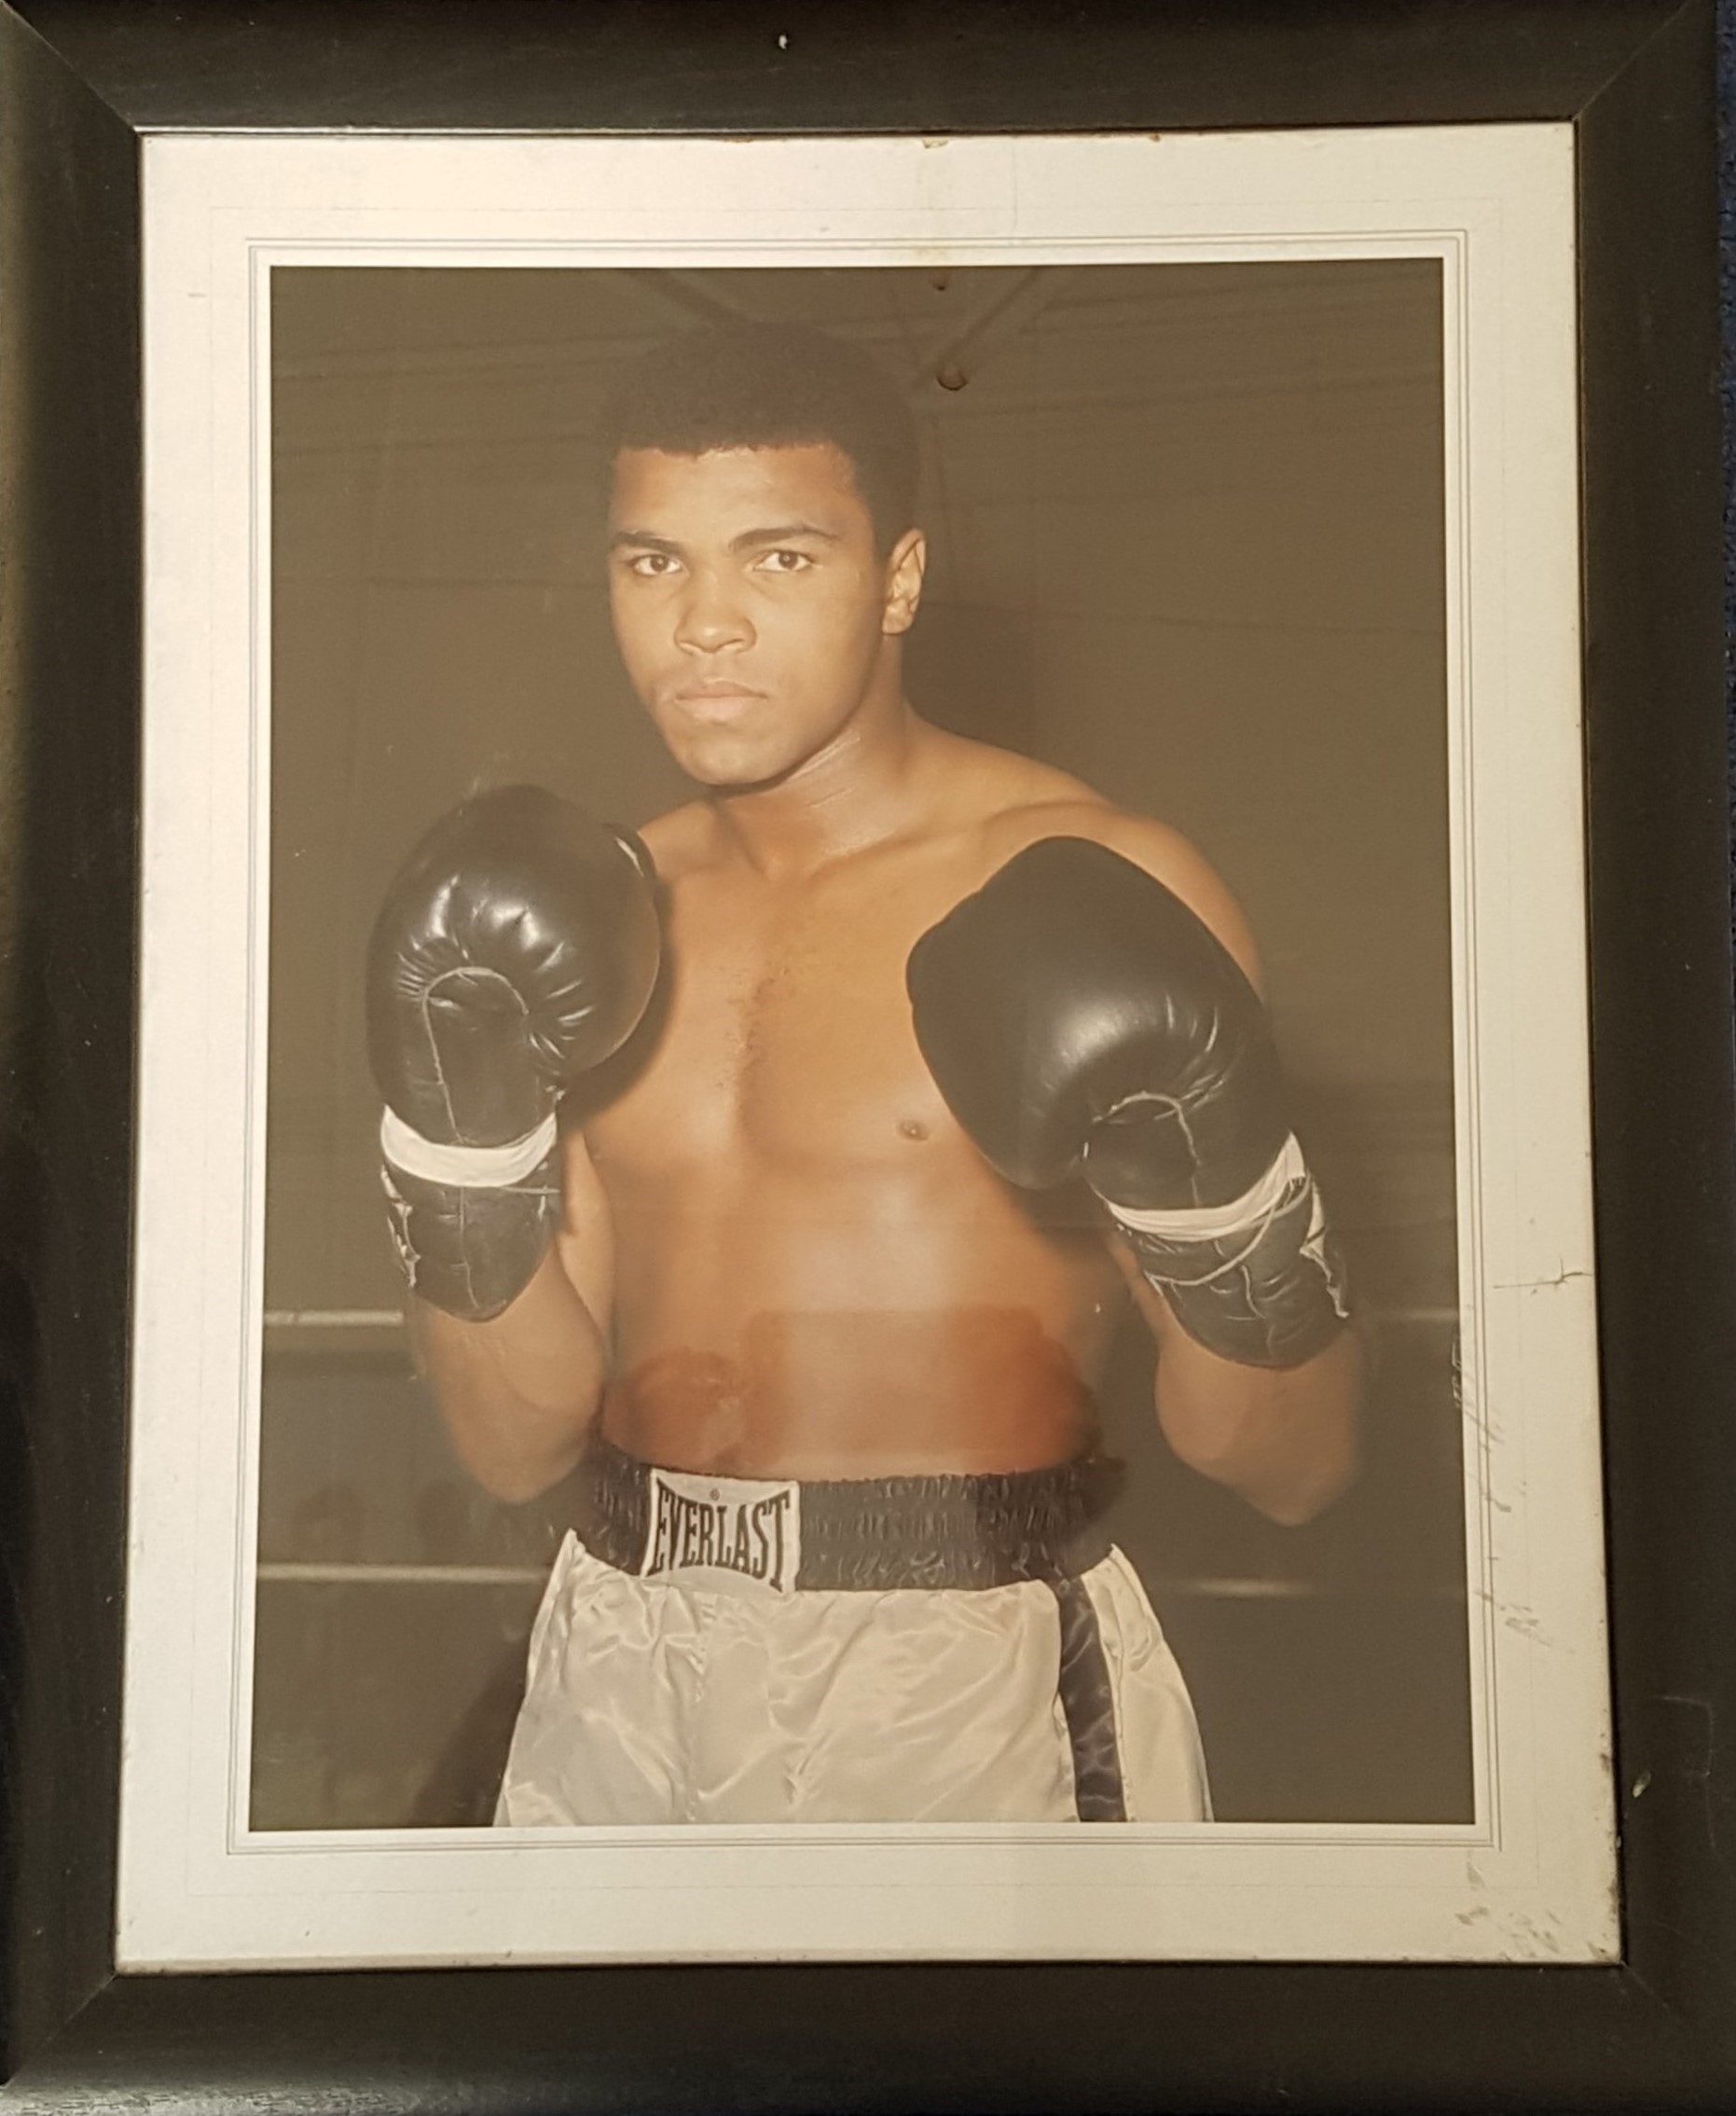 Muhammad Ali Colour Print Housed in a Frame Measuring 22 x 19. Good condition. All autographs come